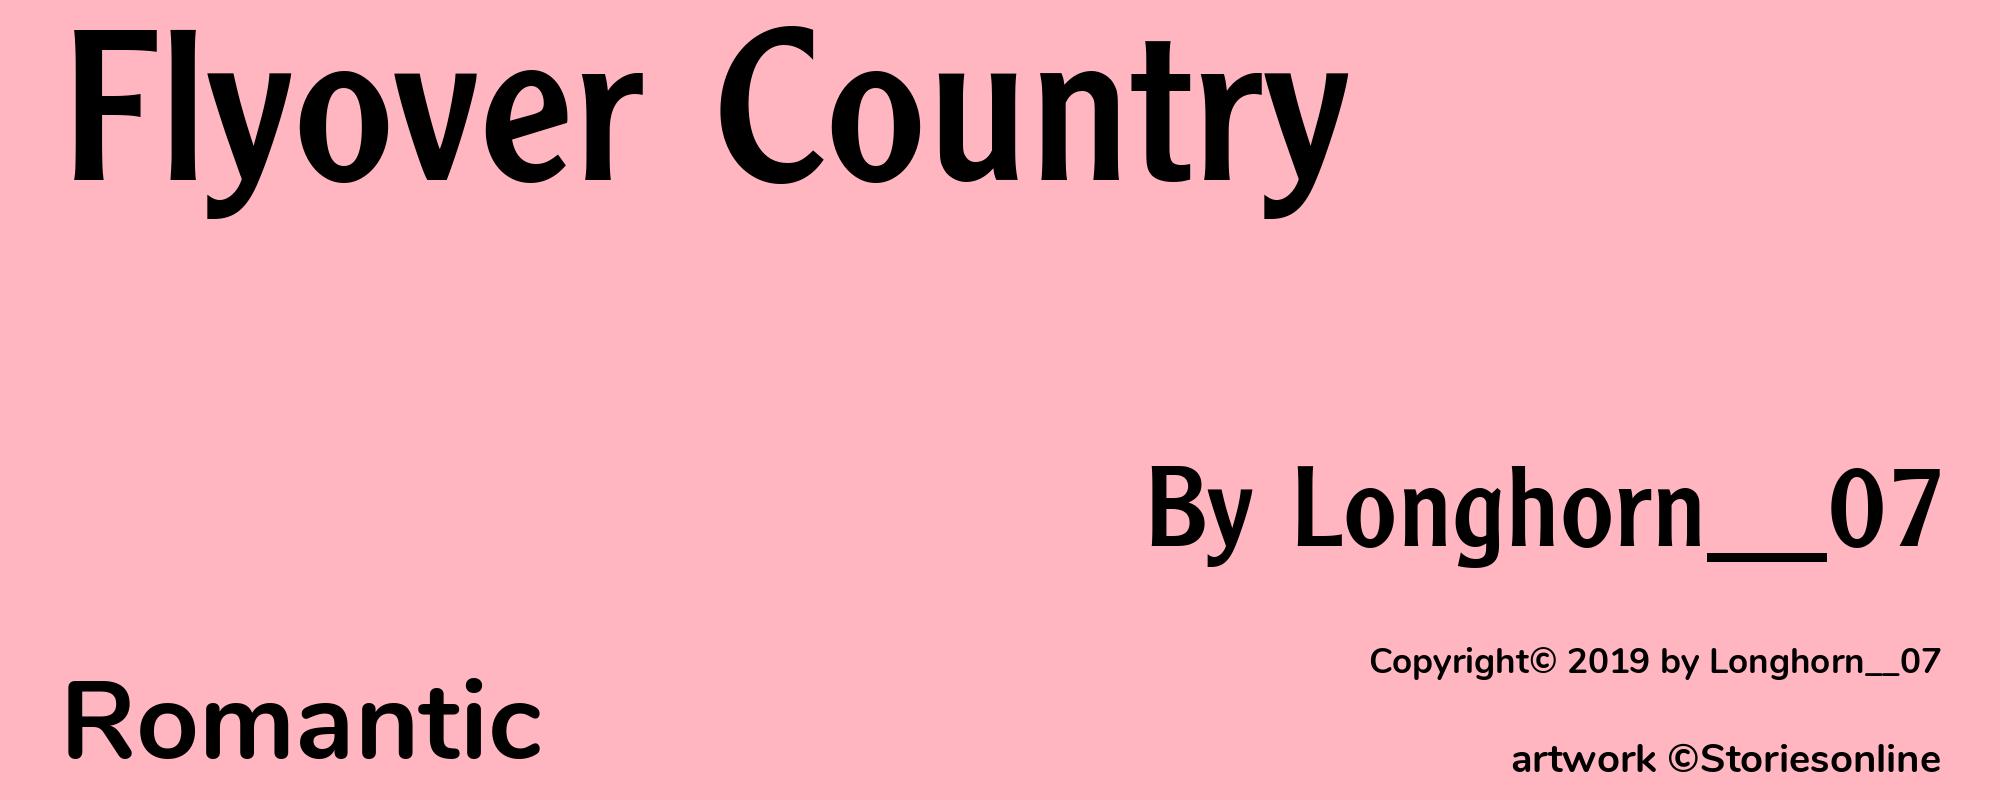 Flyover Country - Cover